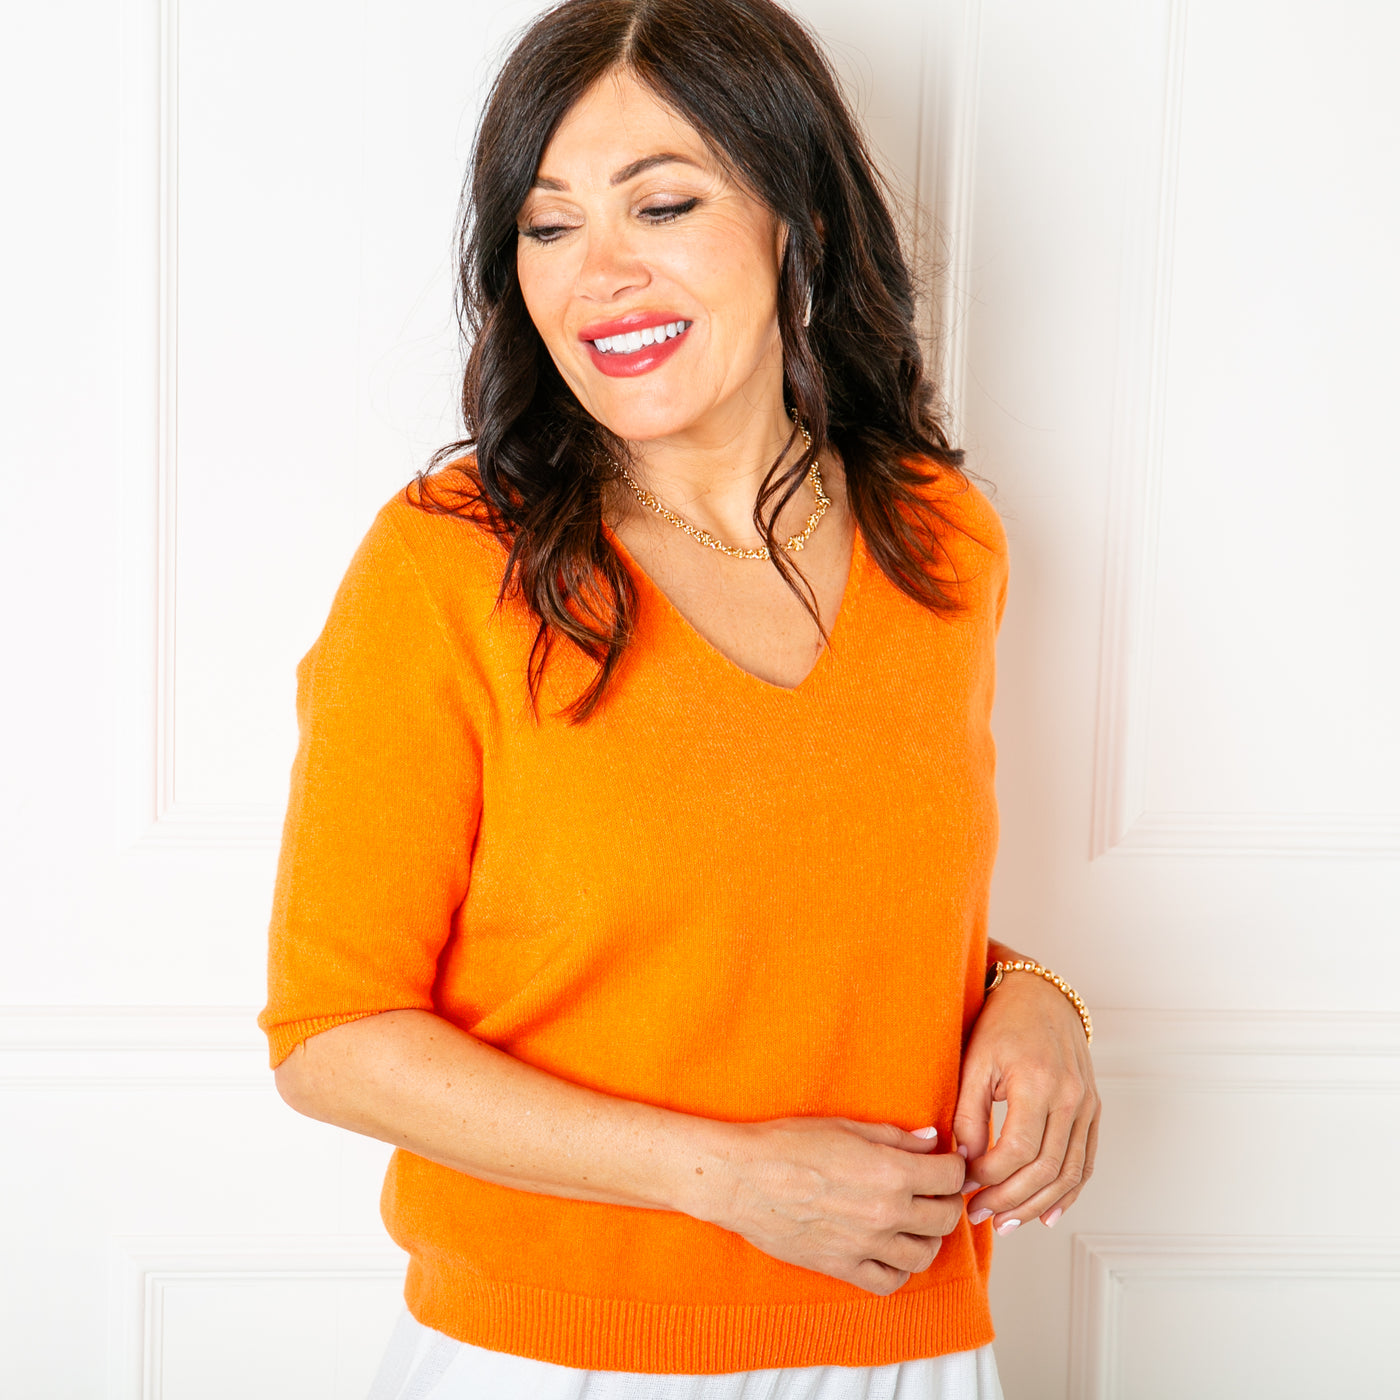 The orange Knitted Short Sleeve Top with a v neckline and 3/4 length sleeves